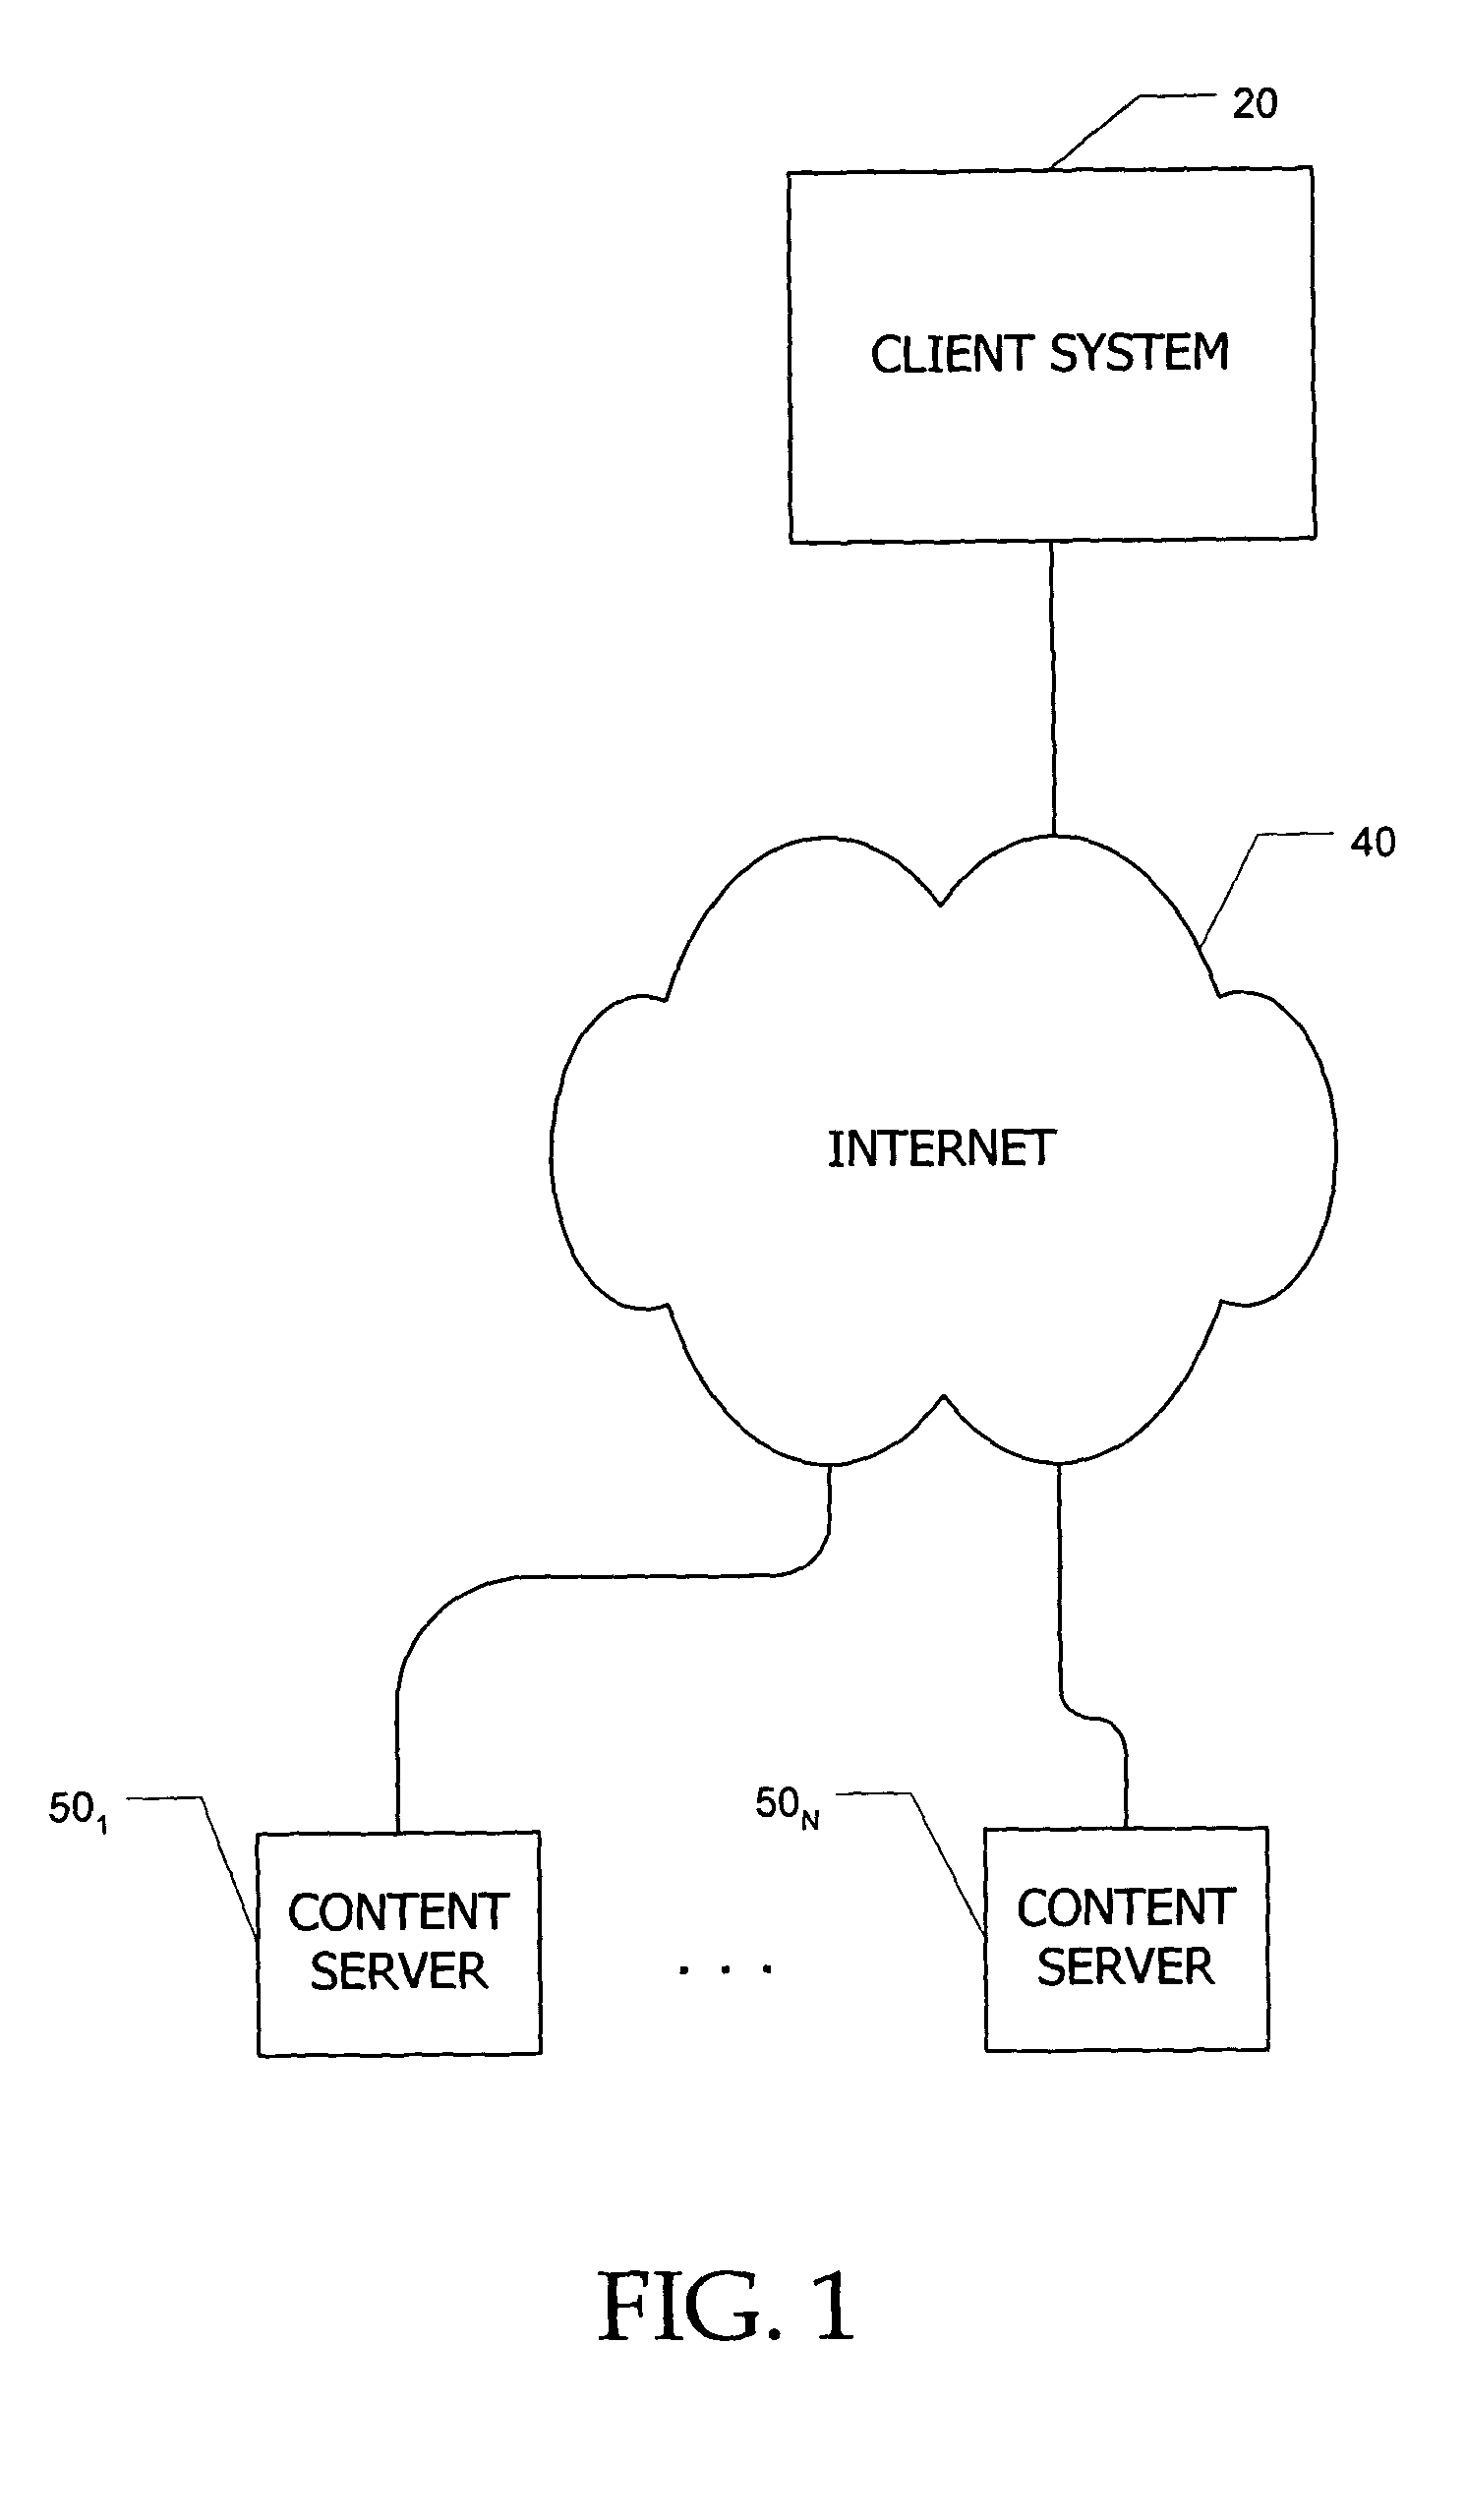 Search system and methods with integration of user annotations from a trust network